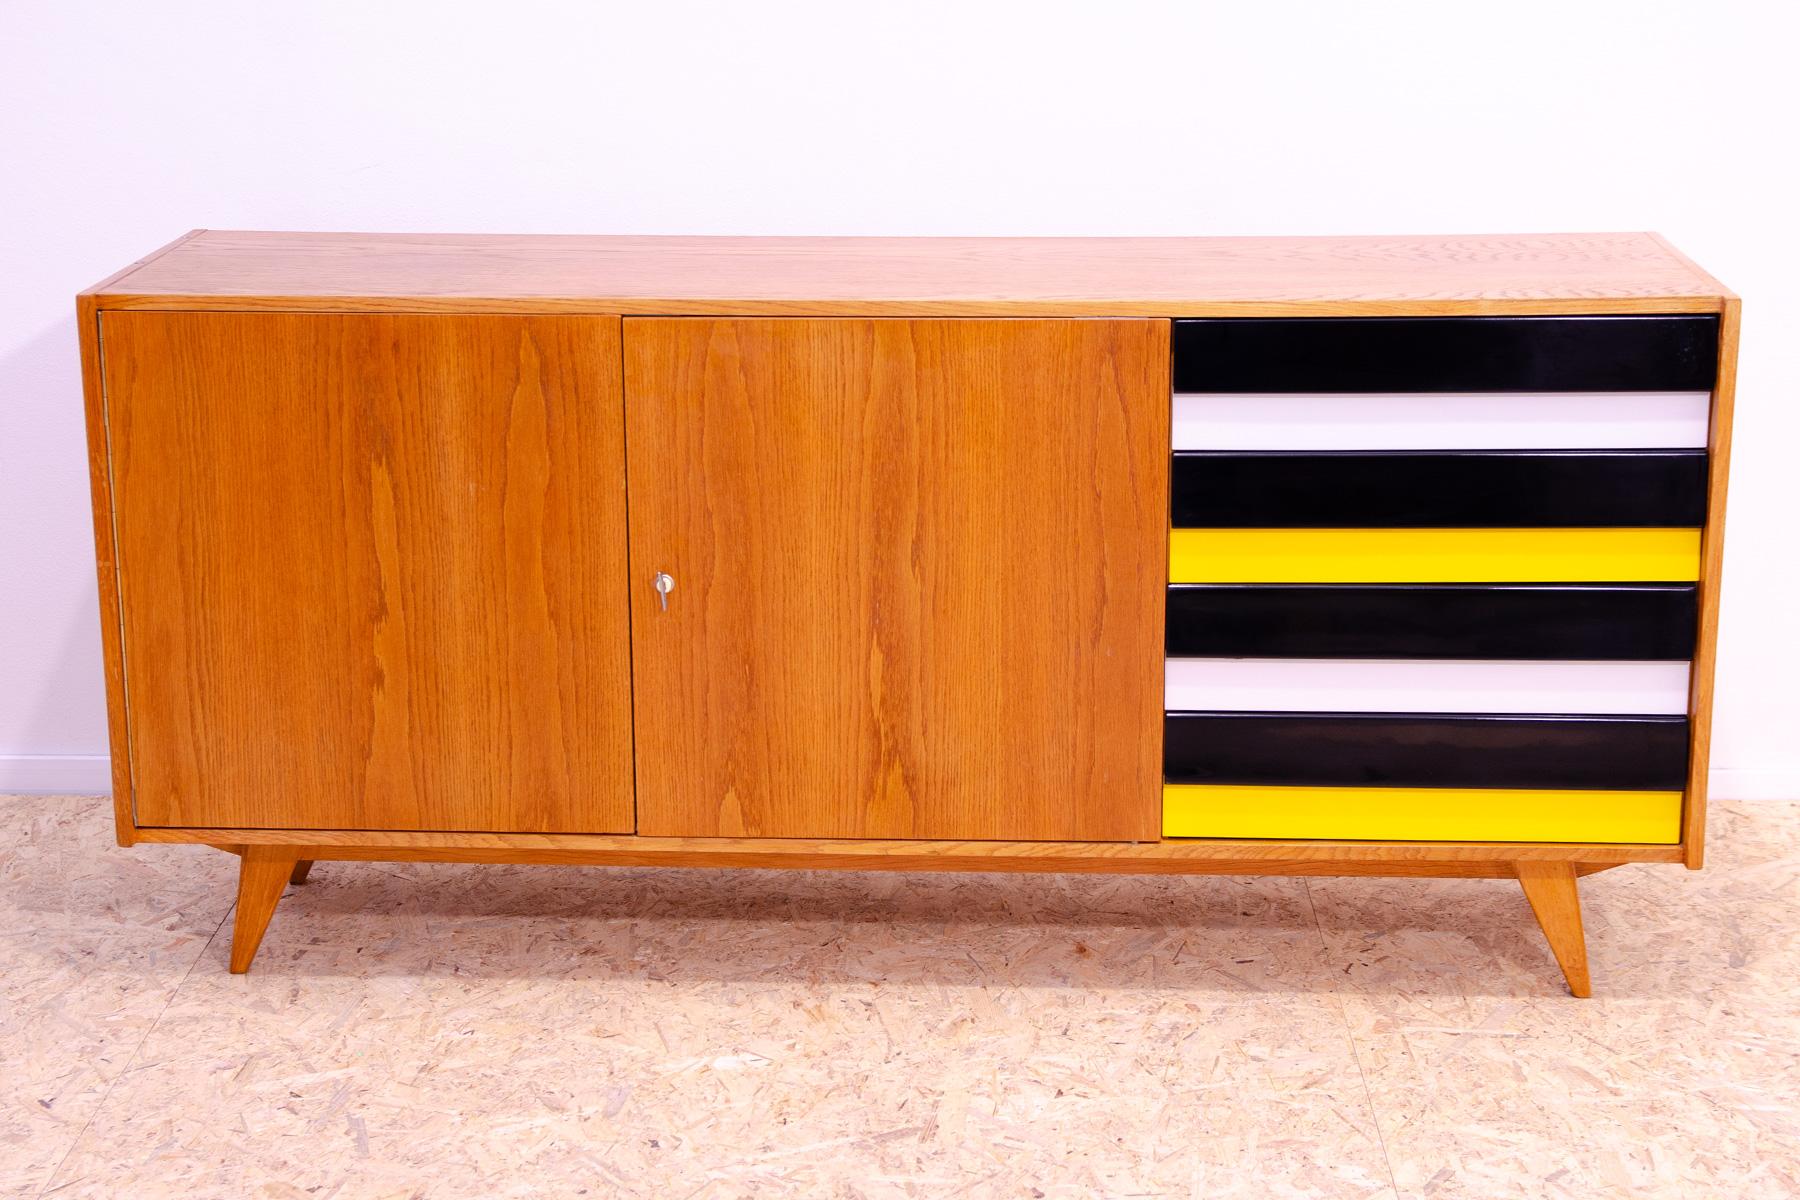 A popular Vintage sideboard model U-460 from the 1960´s. It was designed by Jiri Jiroutek for Interier Praha. It features a beech wood, plywood, colored lacquered drawers. In excellent condition, fully refurbished.

Height: 76 cm, lenght: 165 cm,